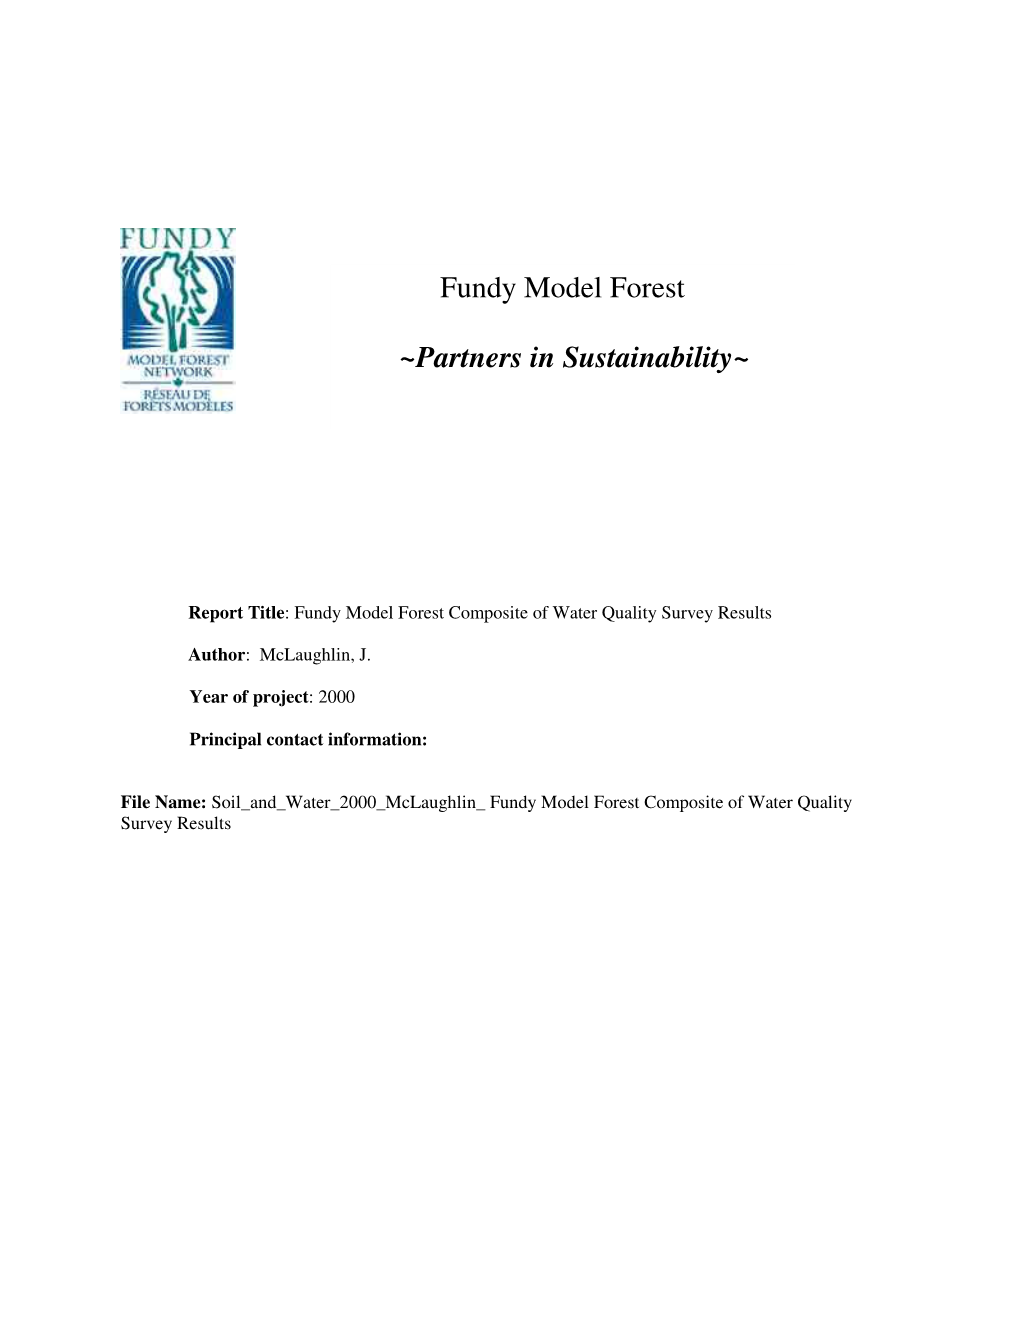 Fundy Model Forest Composite of Water Quality Survey Results